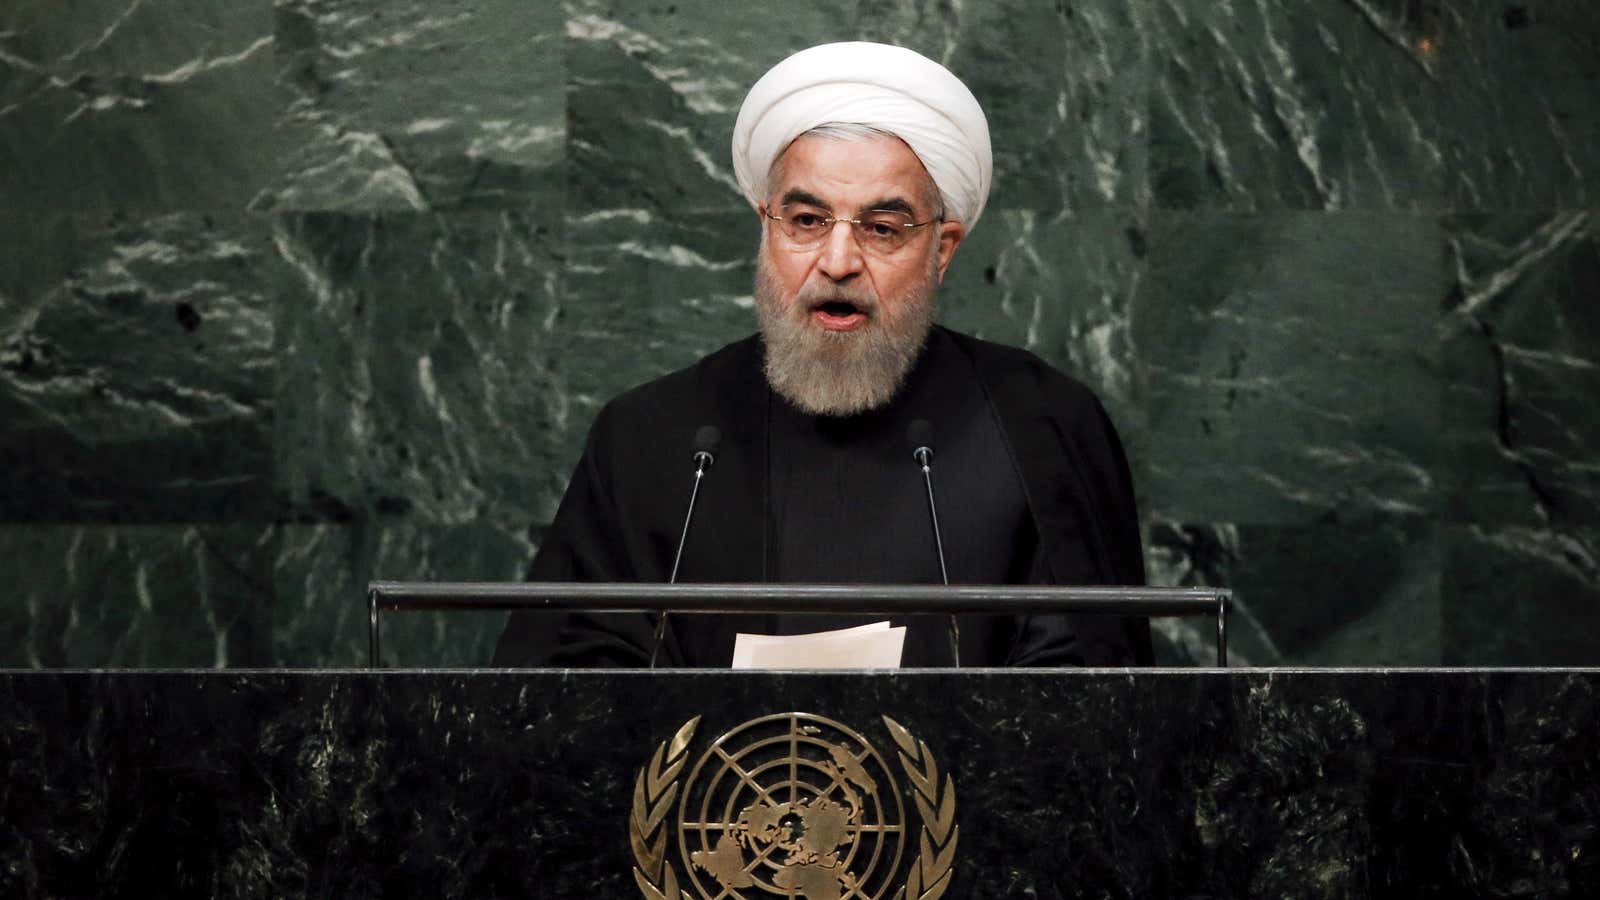 Iran’s President Hassan Rouhani addresses a plenary meeting of the United Nations Sustainable Development Summit 2015 at the United Nations headquarters in Manhattan, New York